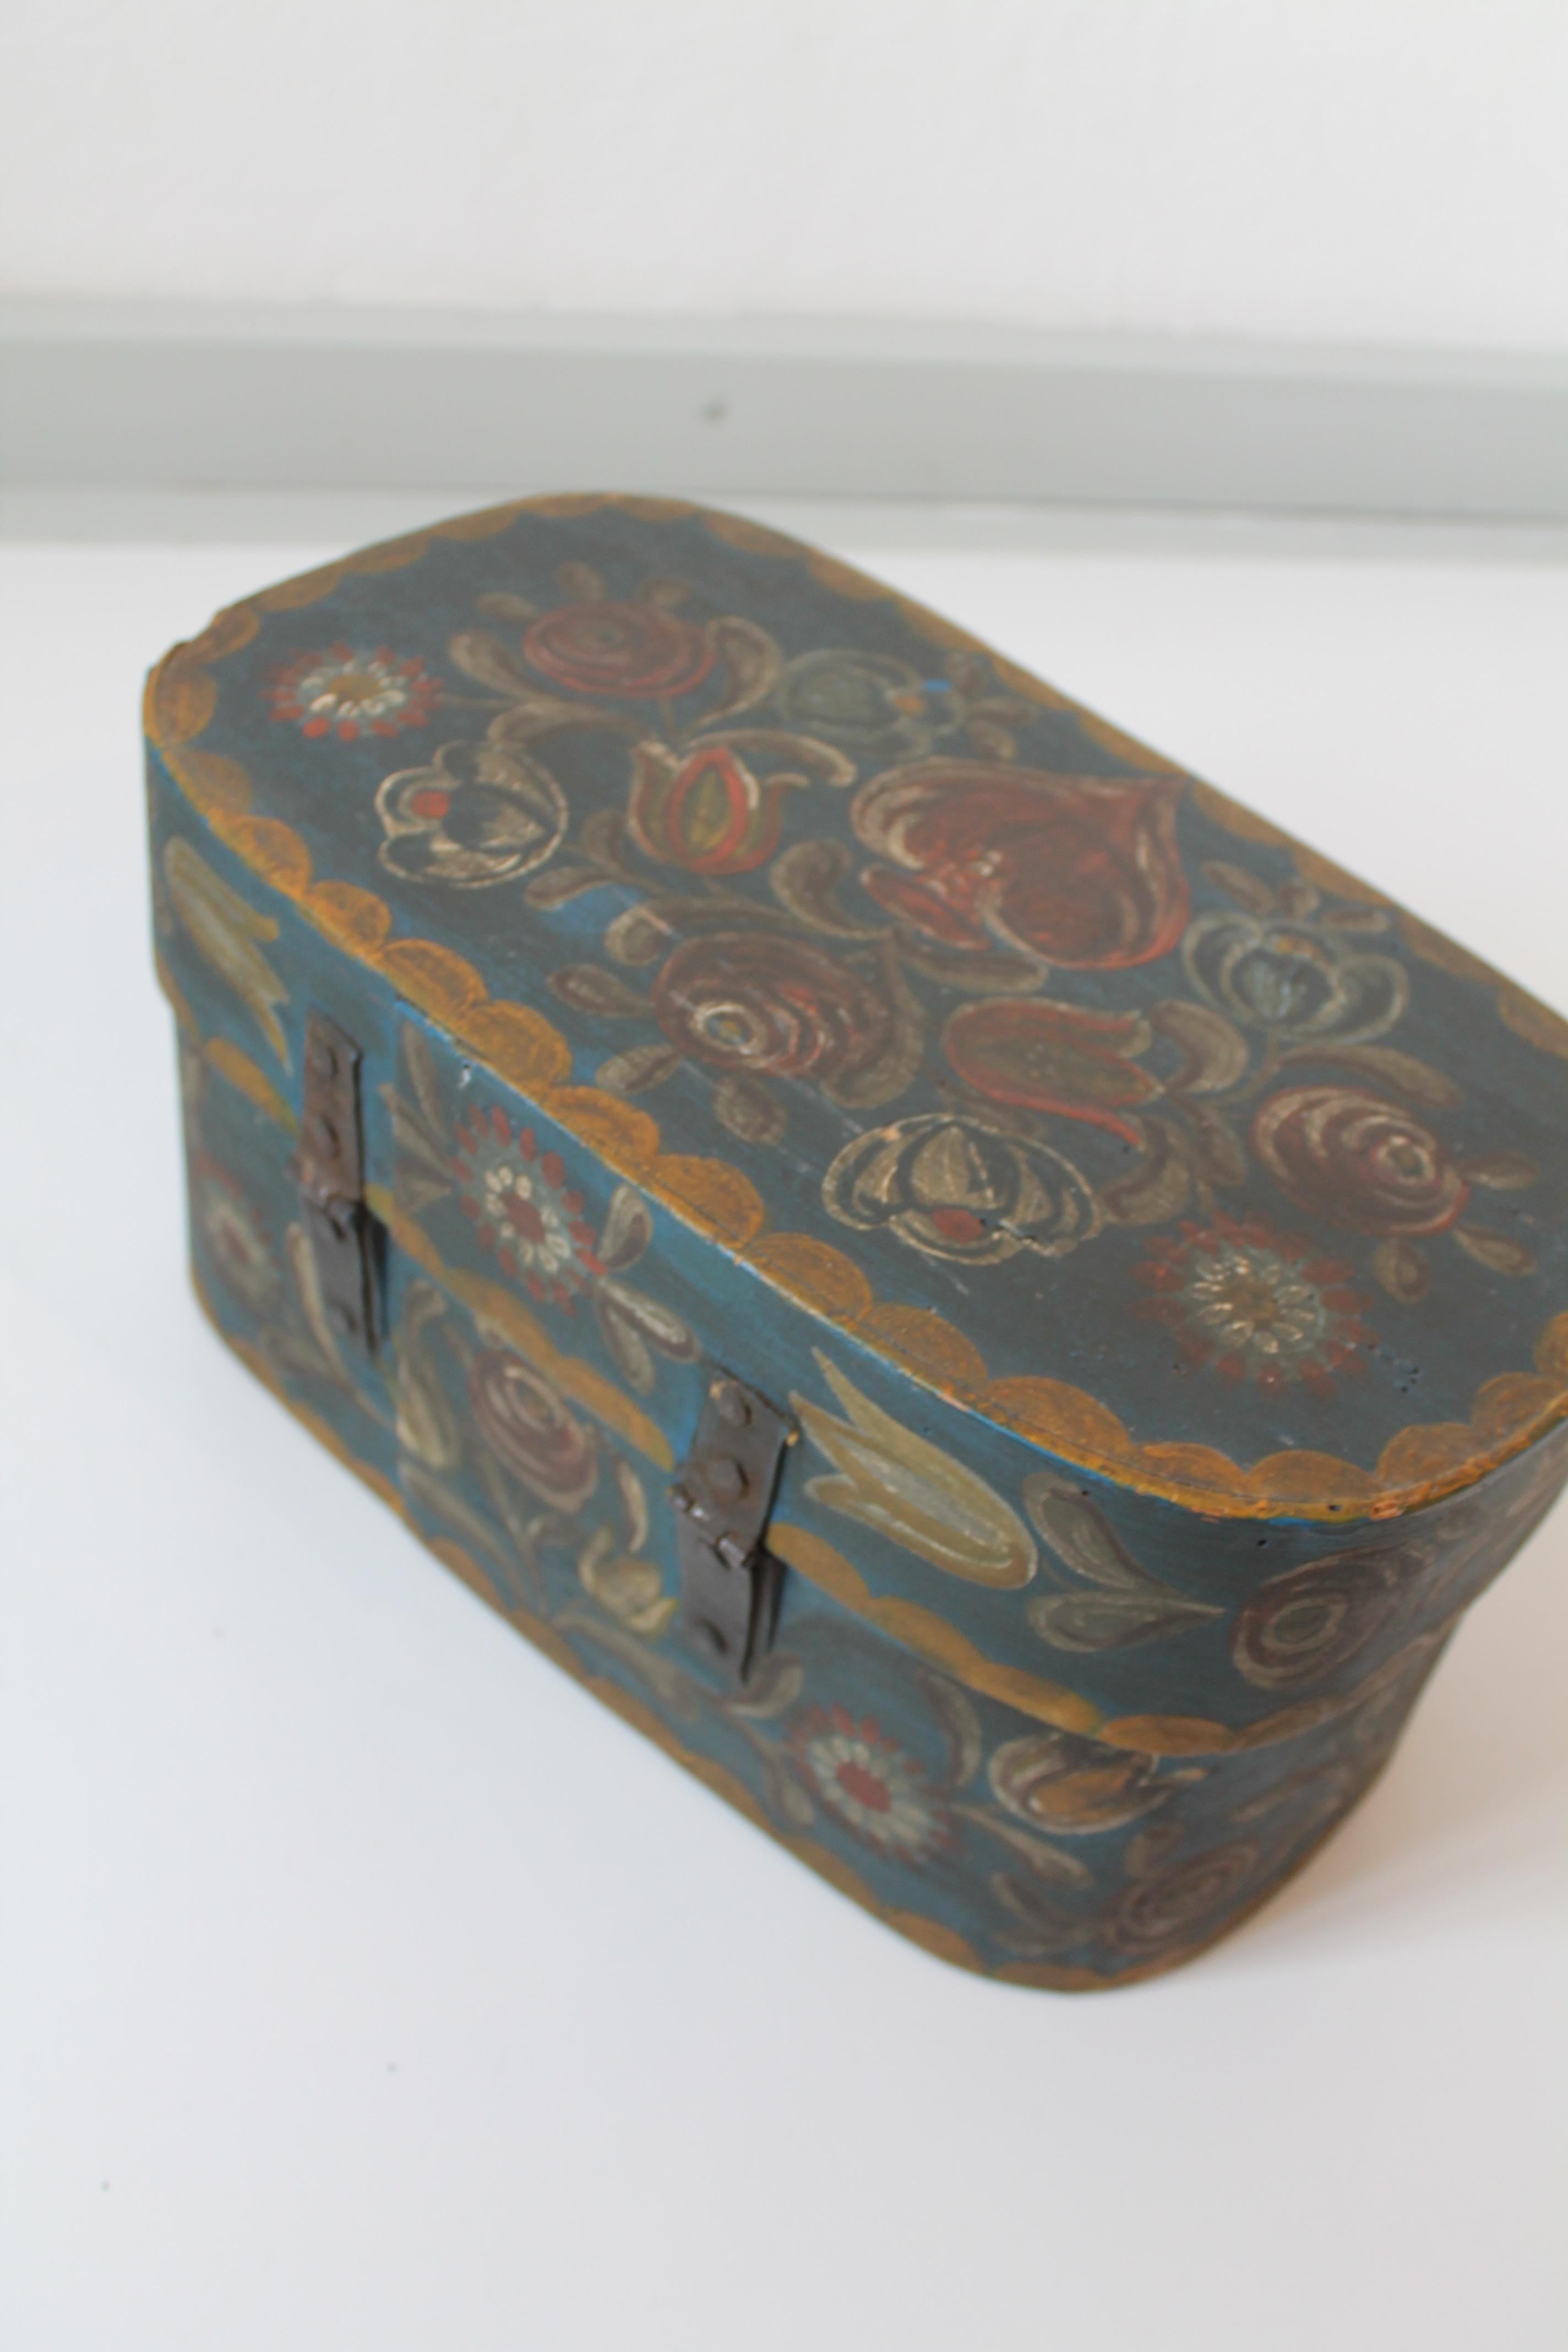 Austrian Chip Box Alpine 18th Century Painted with Flowers